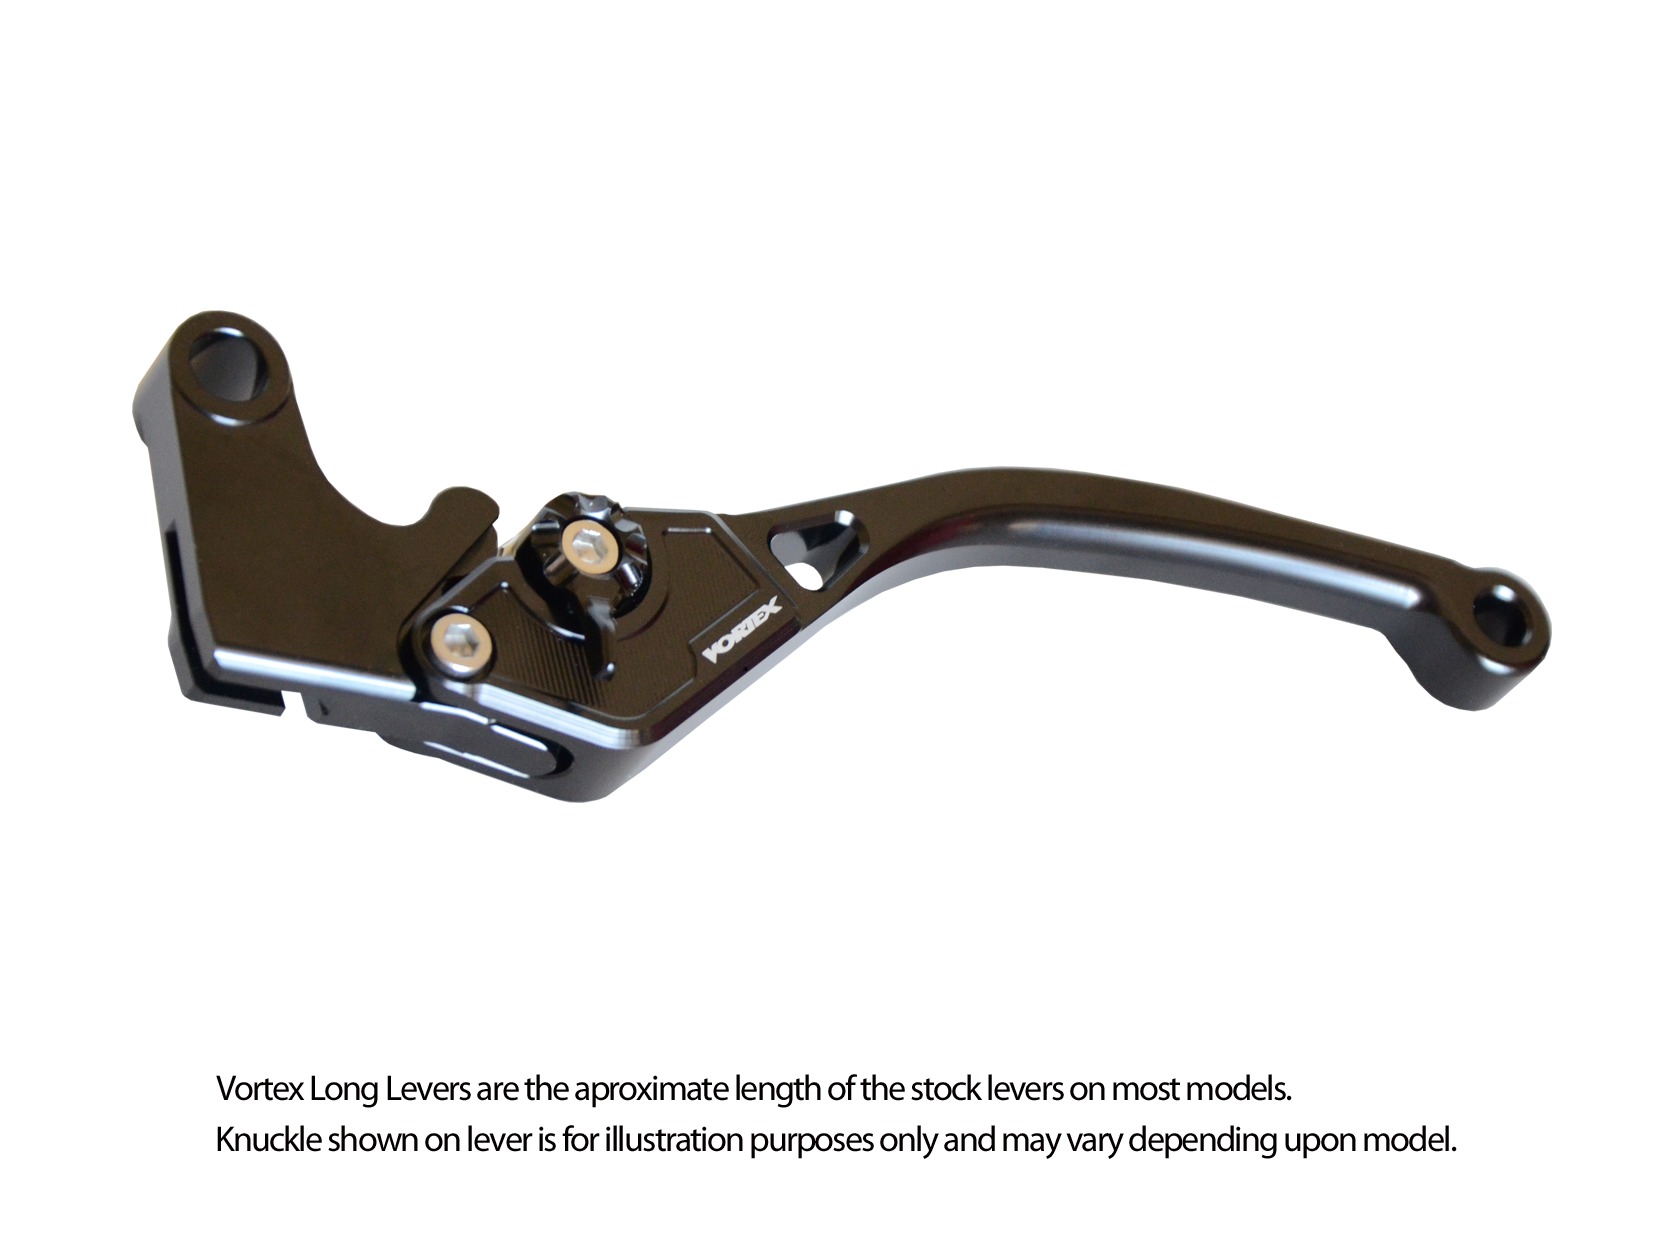 V3 2.0 Black Stock Length Clutch Lever - For 14-17 Ducati 1199 Panigale R/S - Click Image to Close